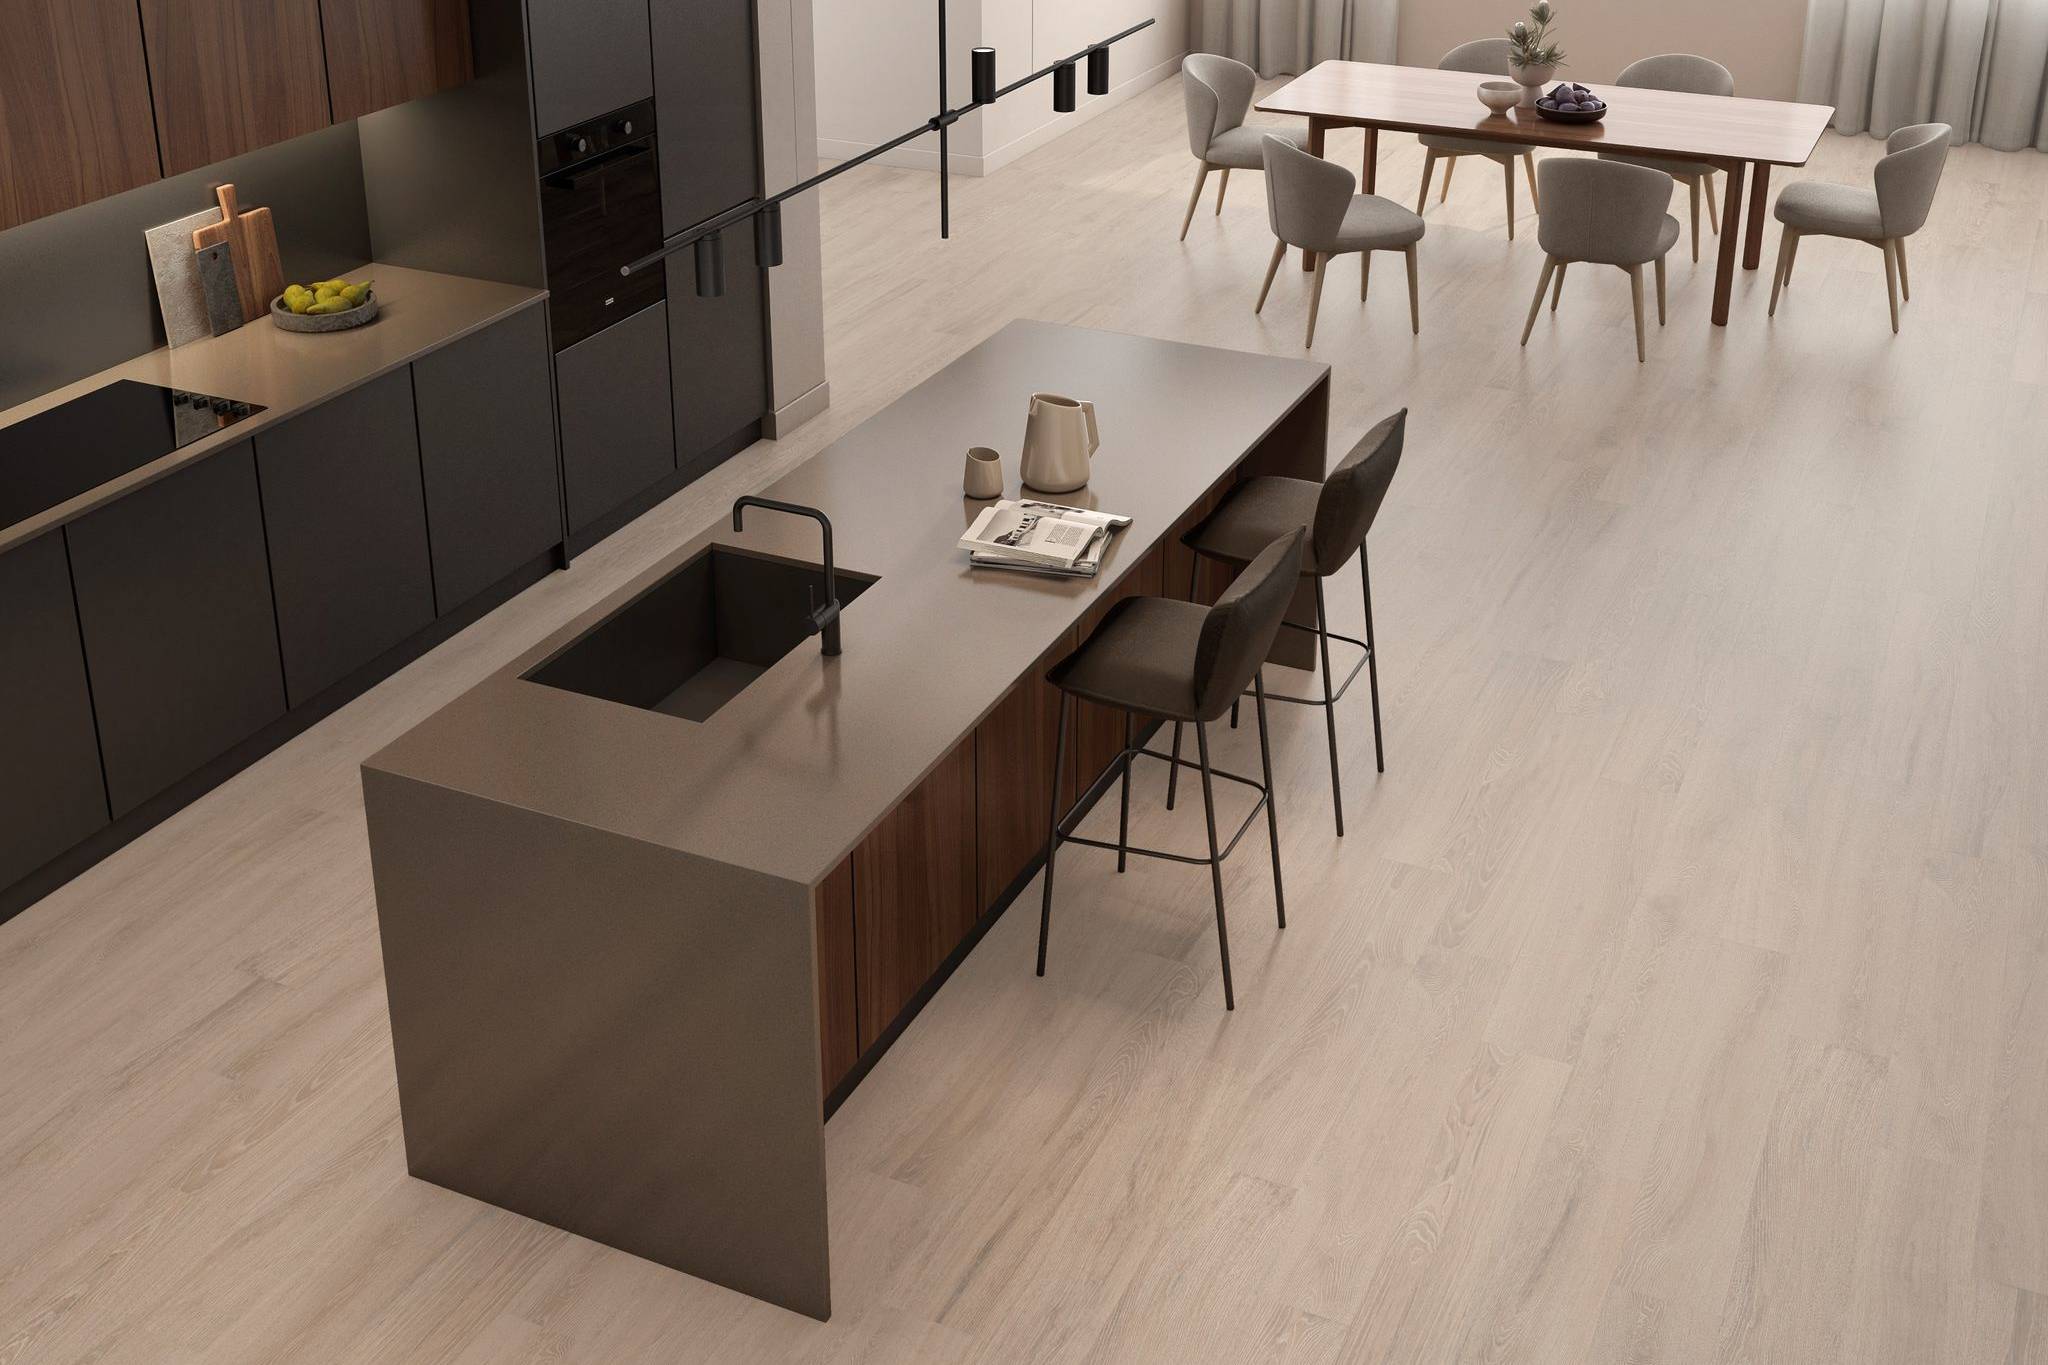 Woodlands 8X48 Haya 1 | Qualis Ceramica | Luxury Tile and Vinyl at affordable prices